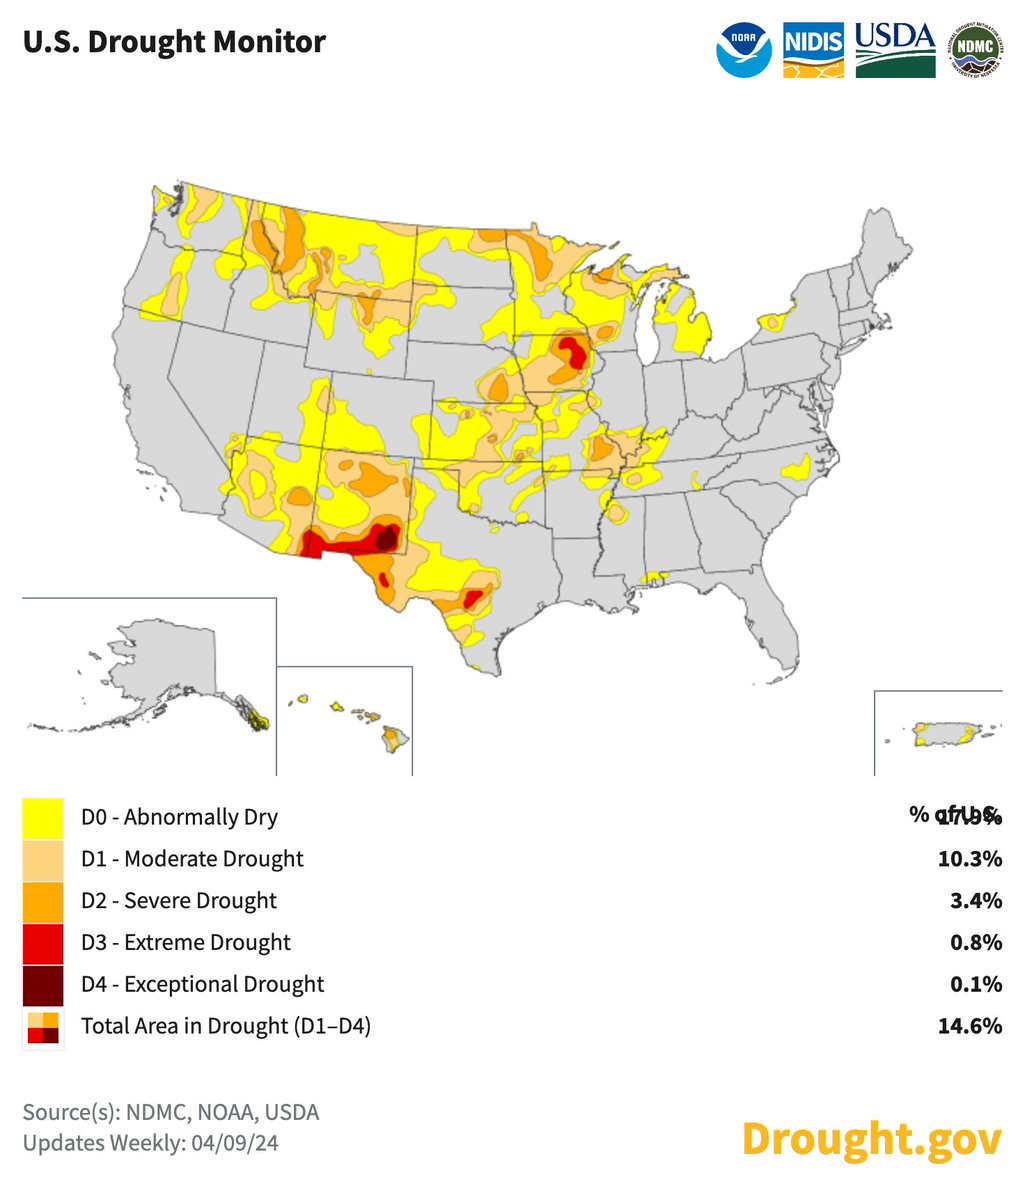 #DroughtMonitor 4/9: Like last week, parts of WA, Central/Southern Plains, and the area around the Ohio and Miss River confluence worsened.

Parts of the Rockies, N. Plains, Southwest, and Midwest improved.

#Drought2024’s Footprint: 14.6% of USA

drought.gov @NOAA